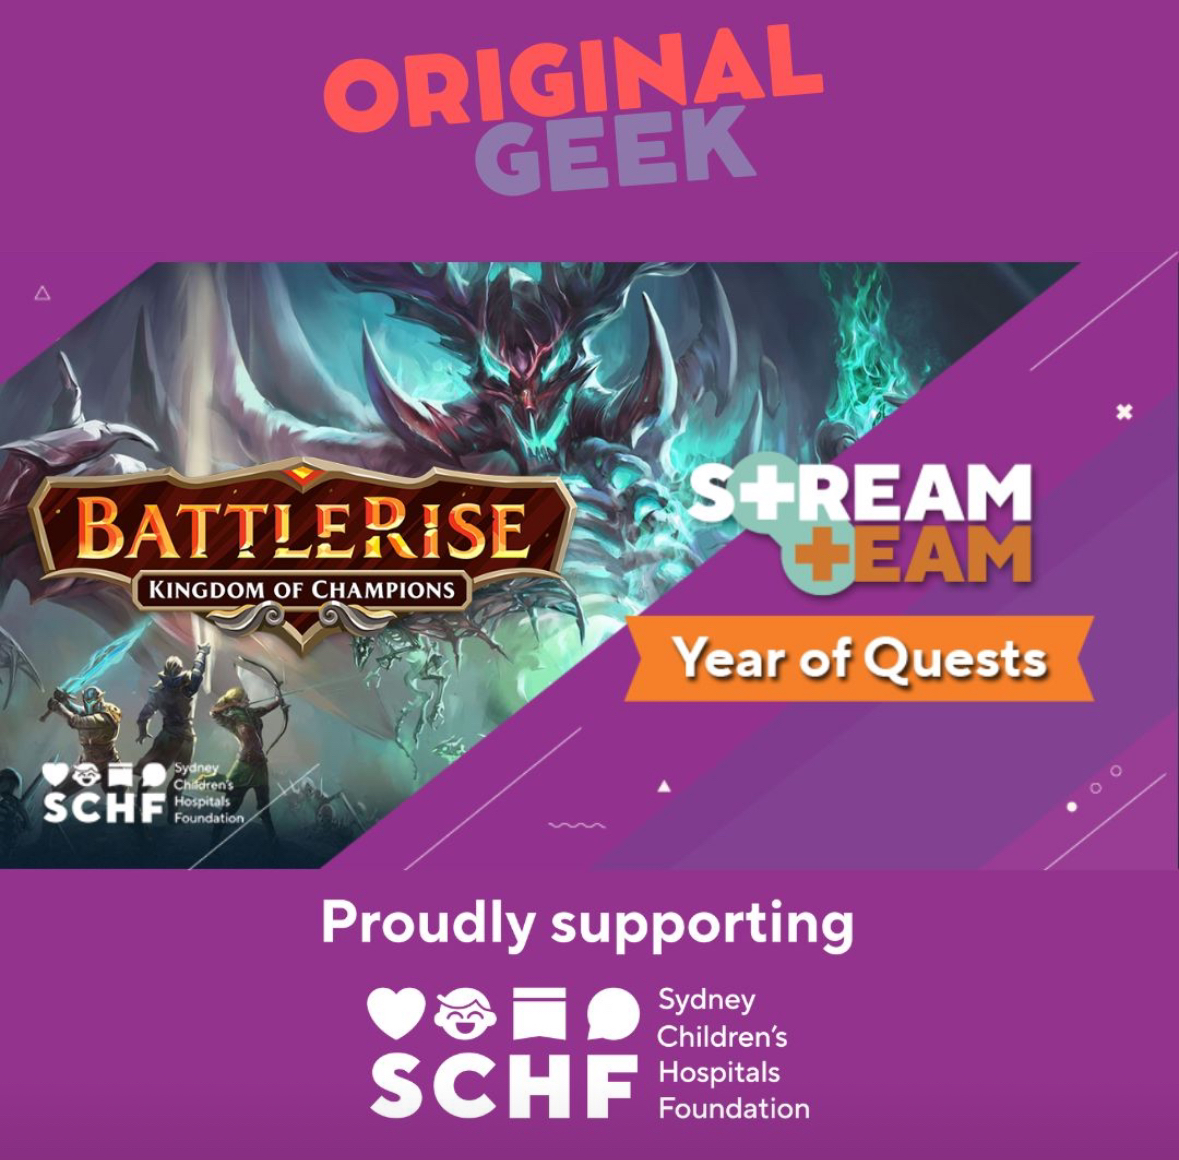 Excited to partner with the Sydney Children's Hospital Foundation! Together, we'll support their vital work providing specialized medical care to children in need. Thank you @schf_kids for all you do! 👶🏥 Join us this month as 26 streamers communities unite for this